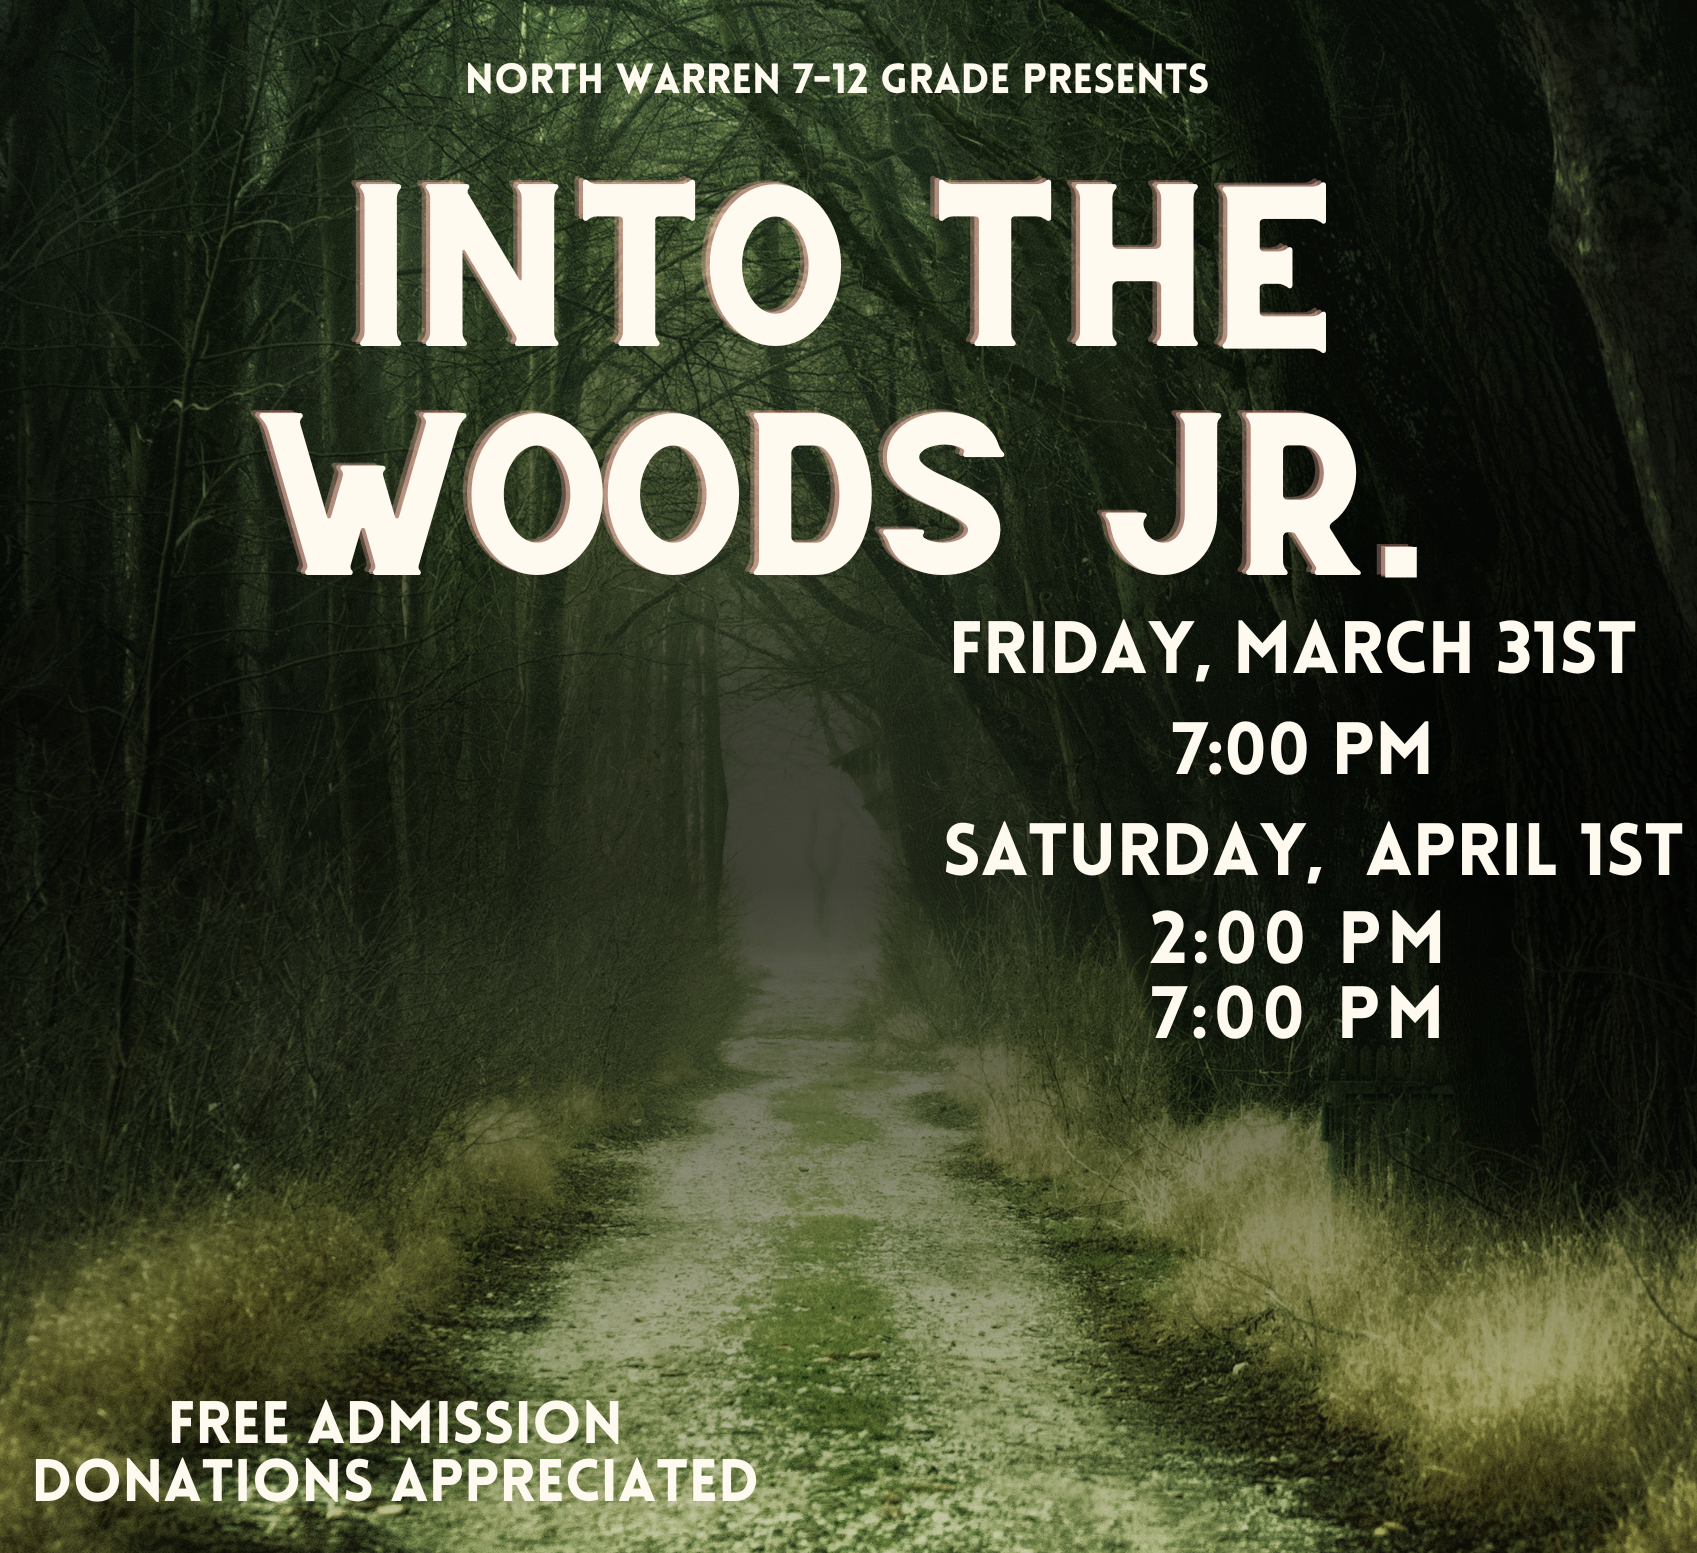 Into the Woods Jr.
Showing at
Friday March 31st 7 pm
Satruday April 1st 2 pm
Saturday April 1st 7 pm